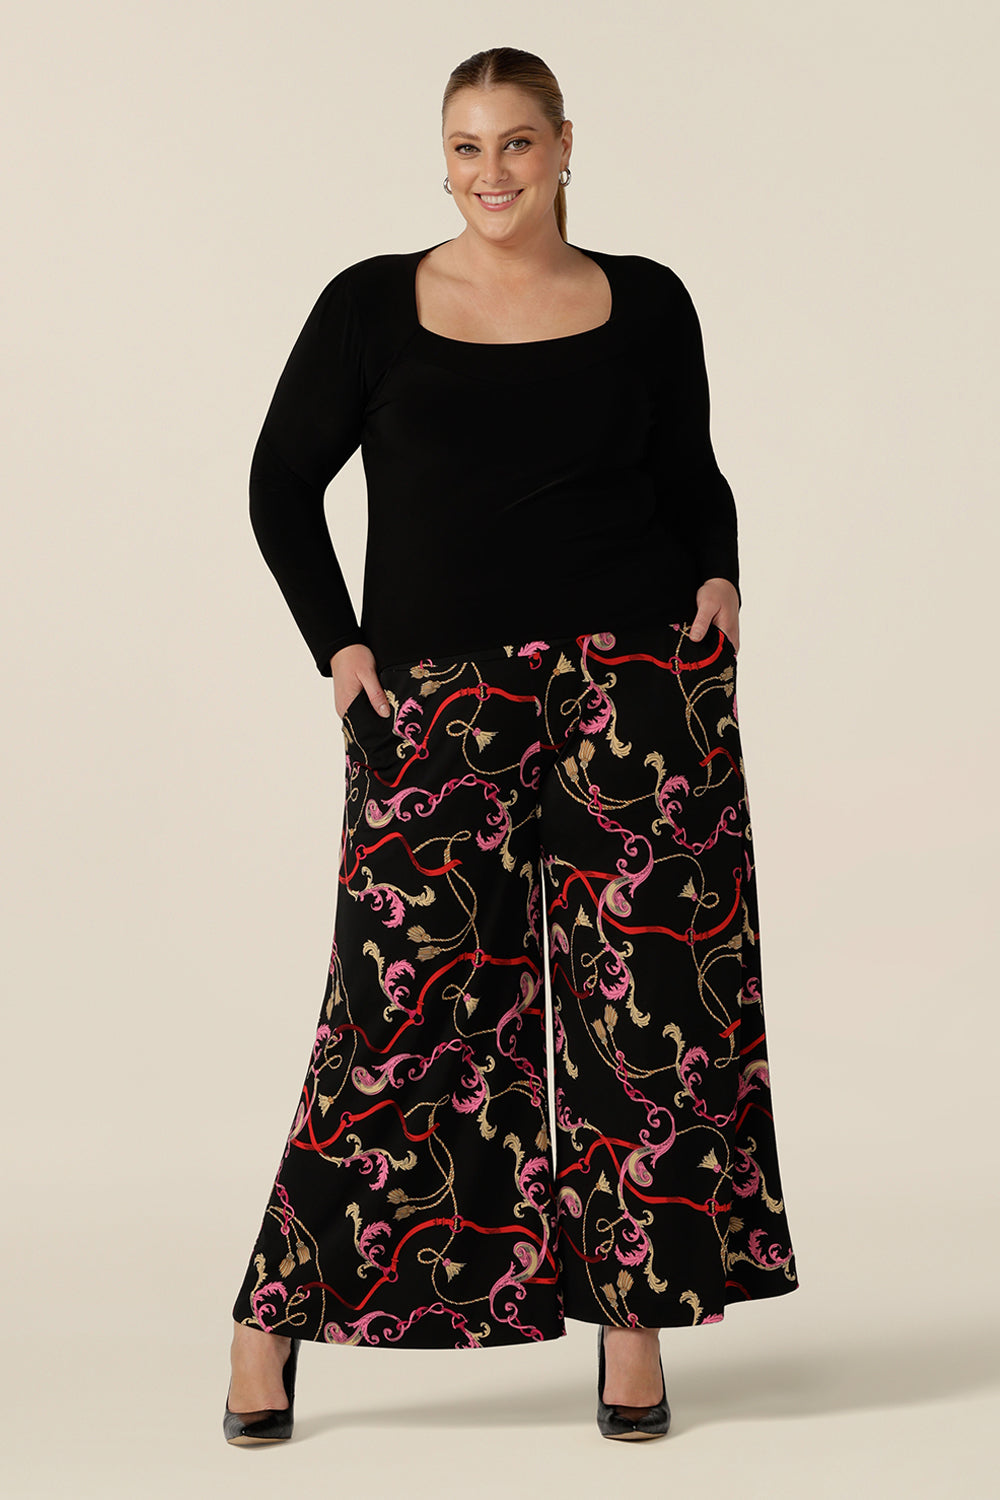 A plus size, size 18 woman wears printed wide leg pants with pockets with a square neck long sleeve black top. These pull-on, easy care pants are comfortable for your everyday workwear capsule wardrobe. Shop these Australian-made wide leg trousers online in sizes 8 to 24, petite to plus sizes.